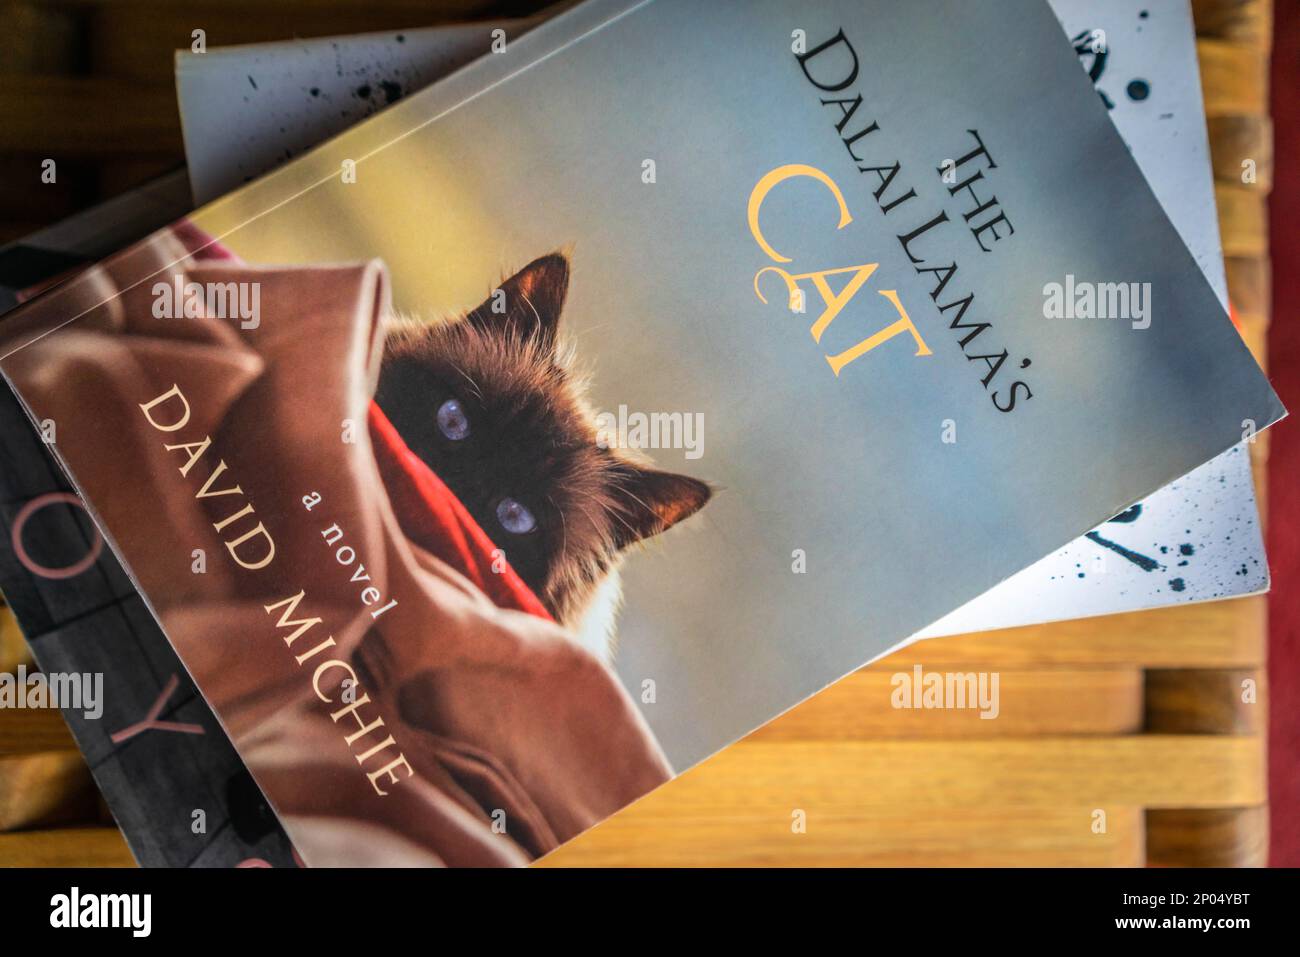 A copy of the Dalai Lama's cat Buddhist teachings by author David Mitchie Stock Photo